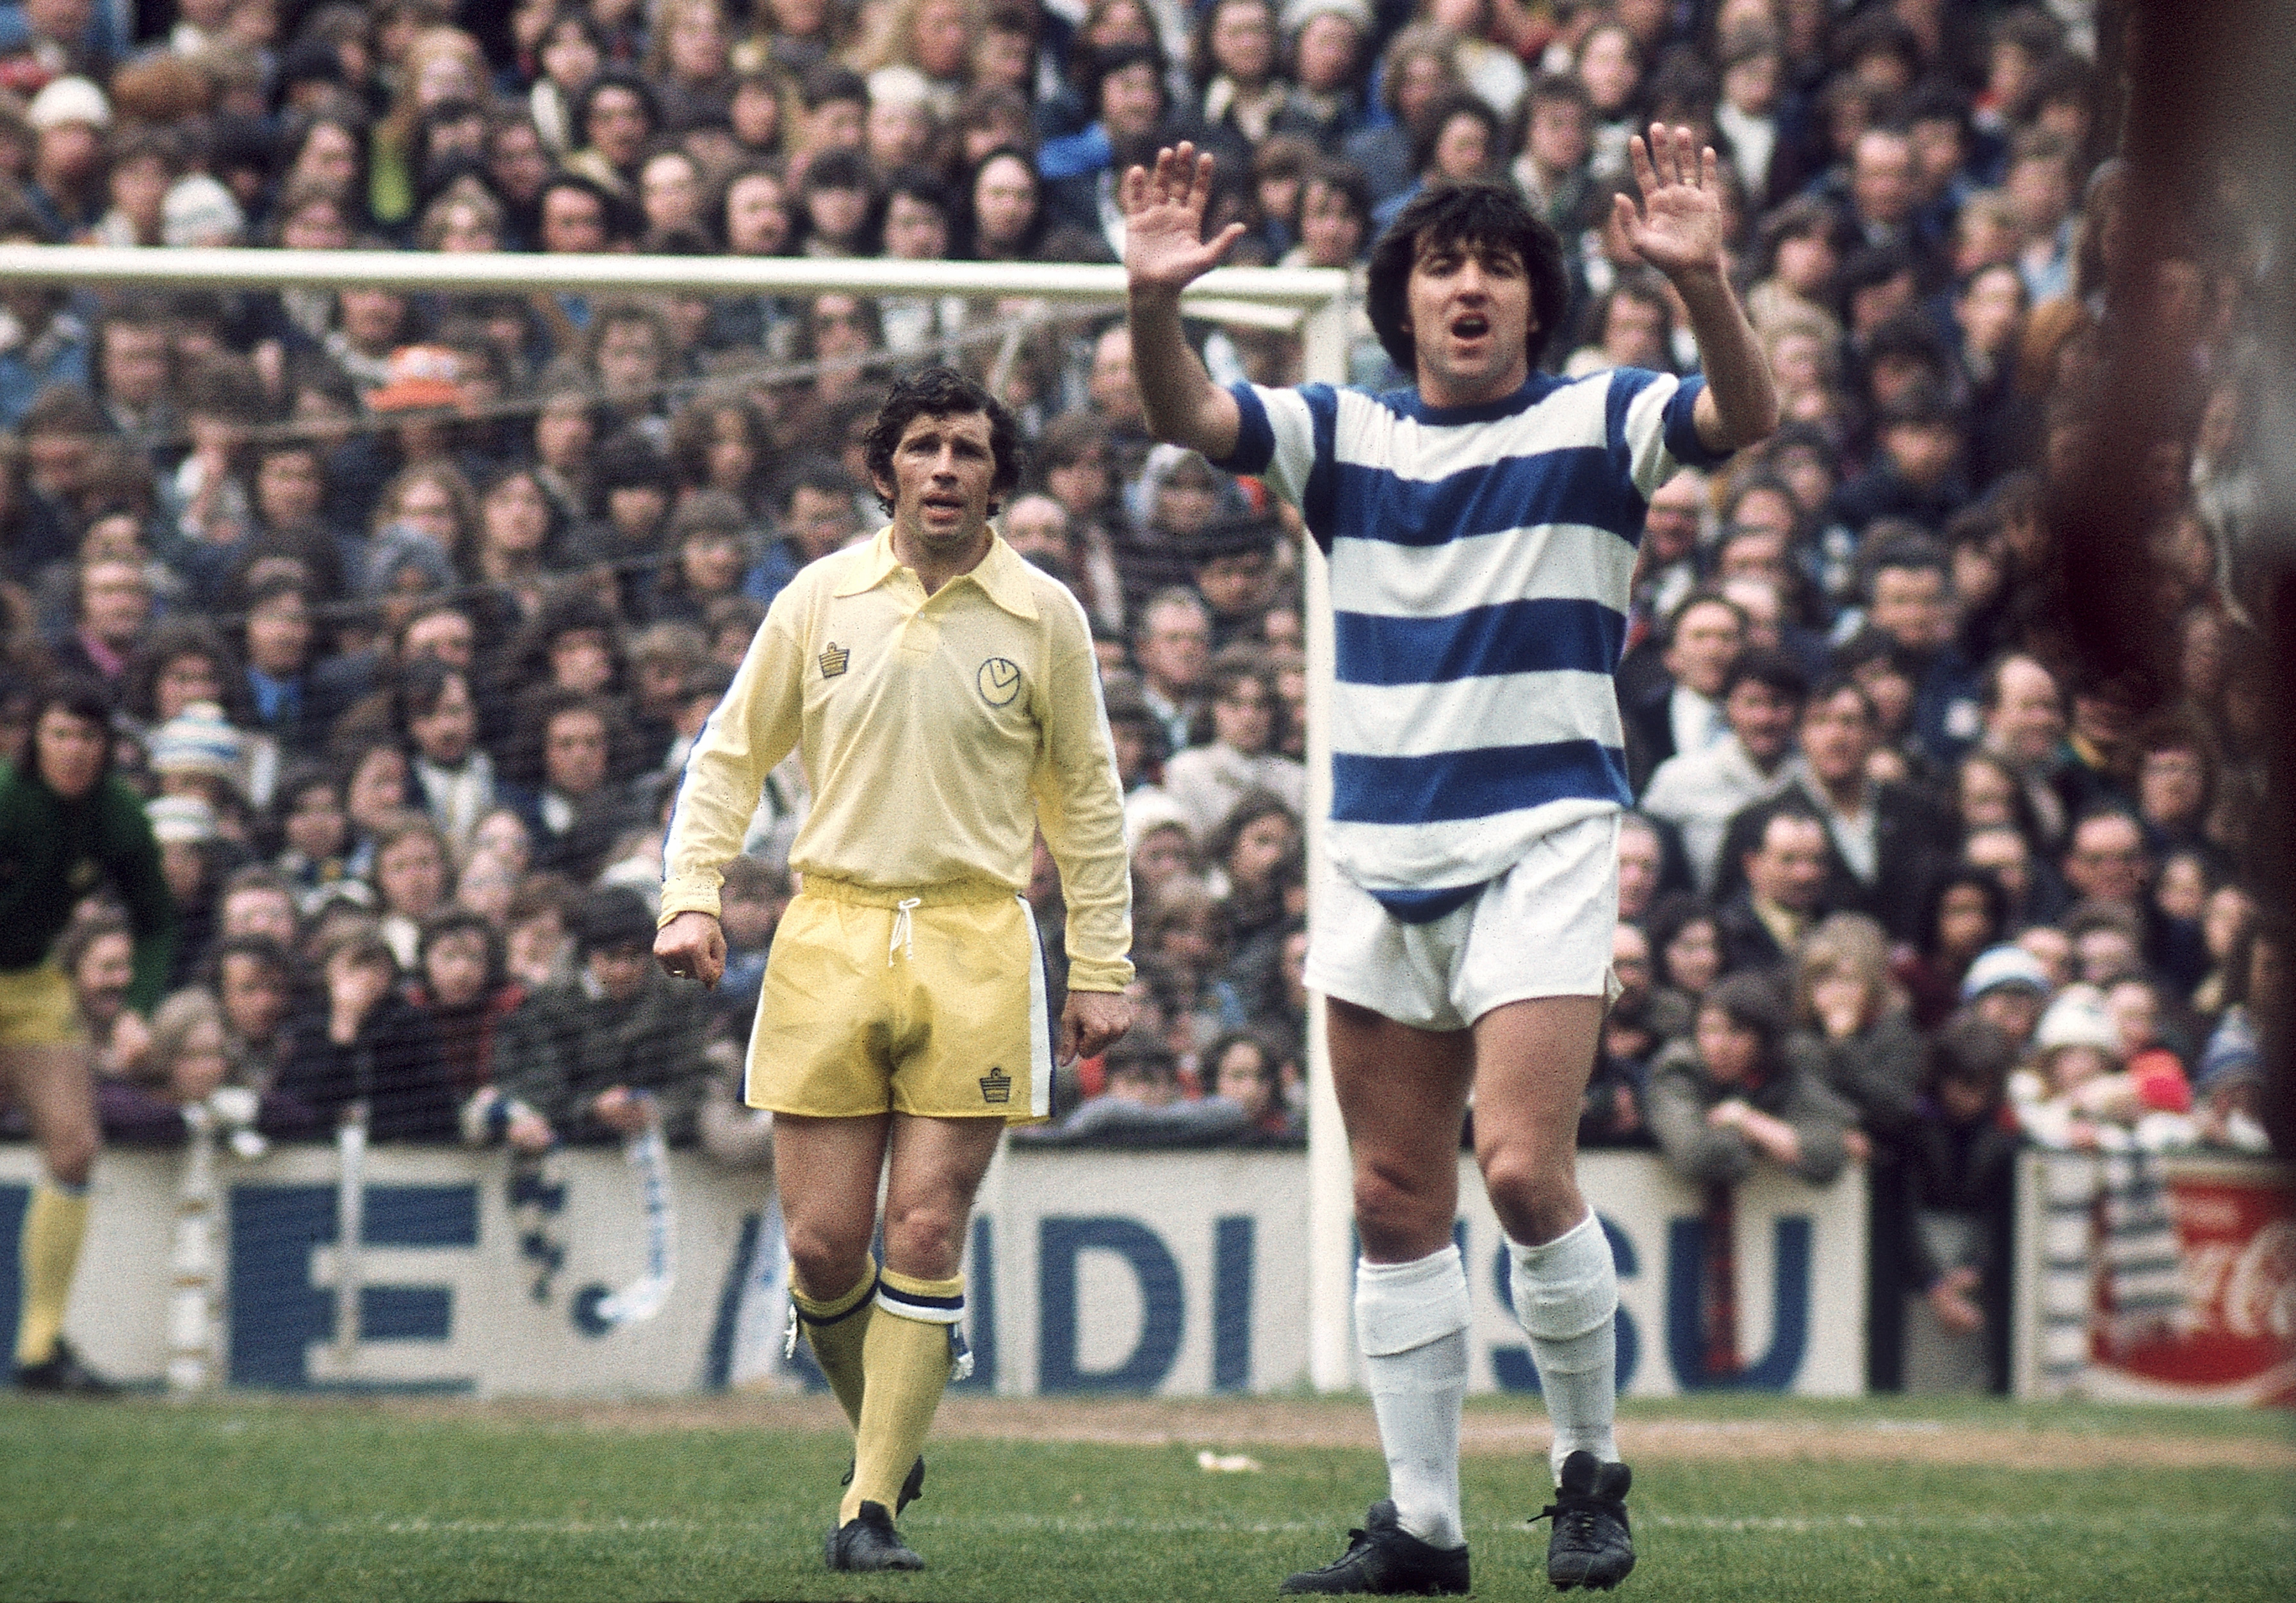 LONDON - APRIL 27:  Terry Venables of Queens Park Rangers gives orders to his team-mates as Johnny Giles of Leeds United looks on during the League Division One match held on April 27, 1974 at Loftus Road, in London. Leeds United won the match 1-0. (Photo